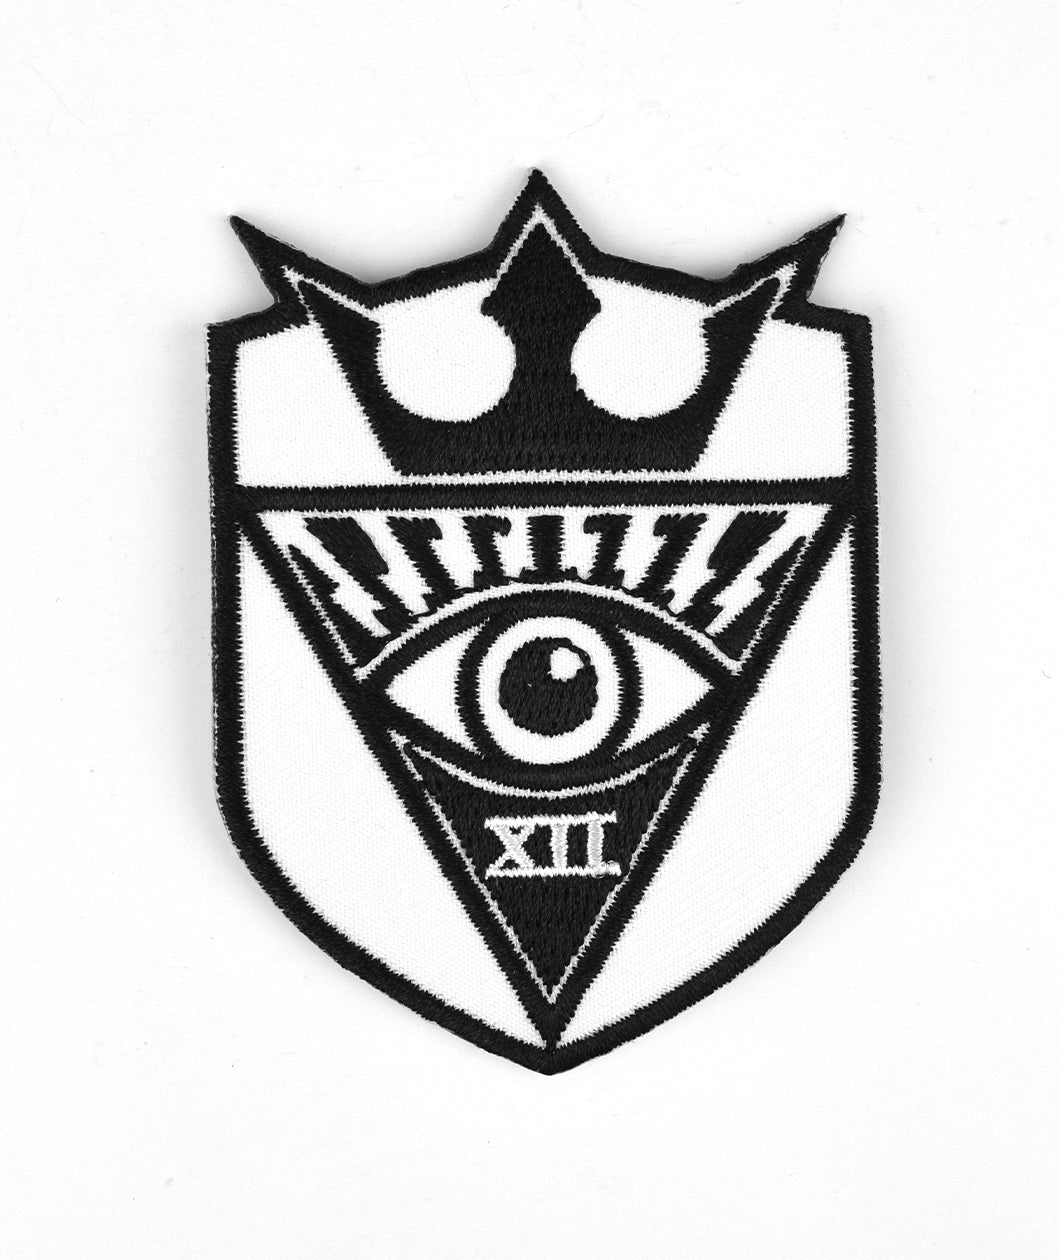 White sheild patch with a black outline. There is an upside down black triangle with a black and white eye in it with XII below in white font. A black crown is on top of the triangle - from Tesladyne